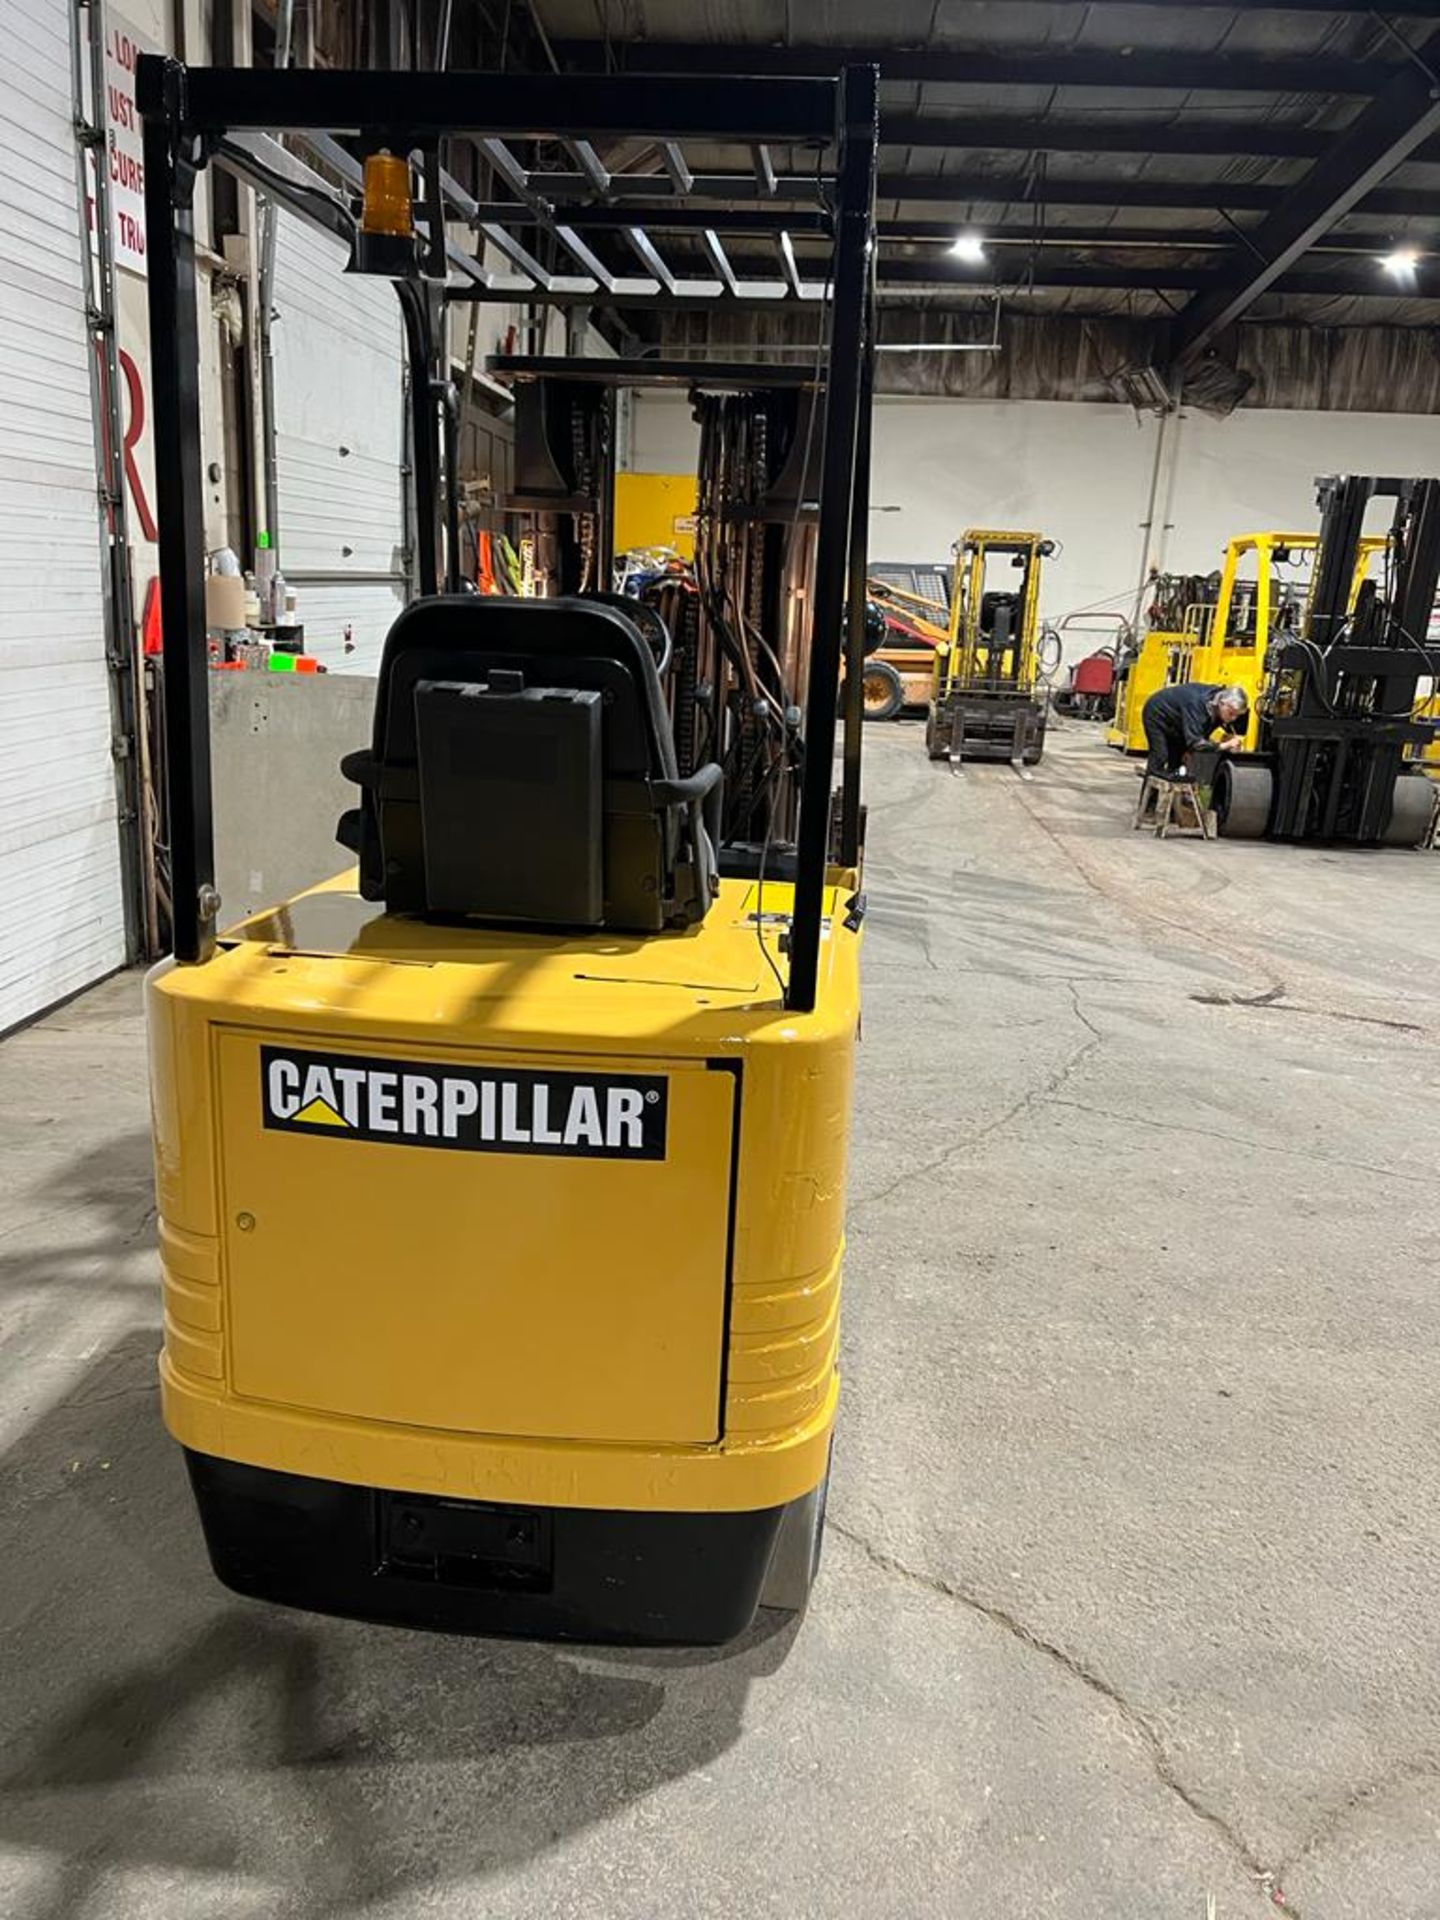 NICE CAT 5,000lbs Capacity Forklift Electric with Sideshift & 3-stage Mast 48V battery - FREE - Image 3 of 3